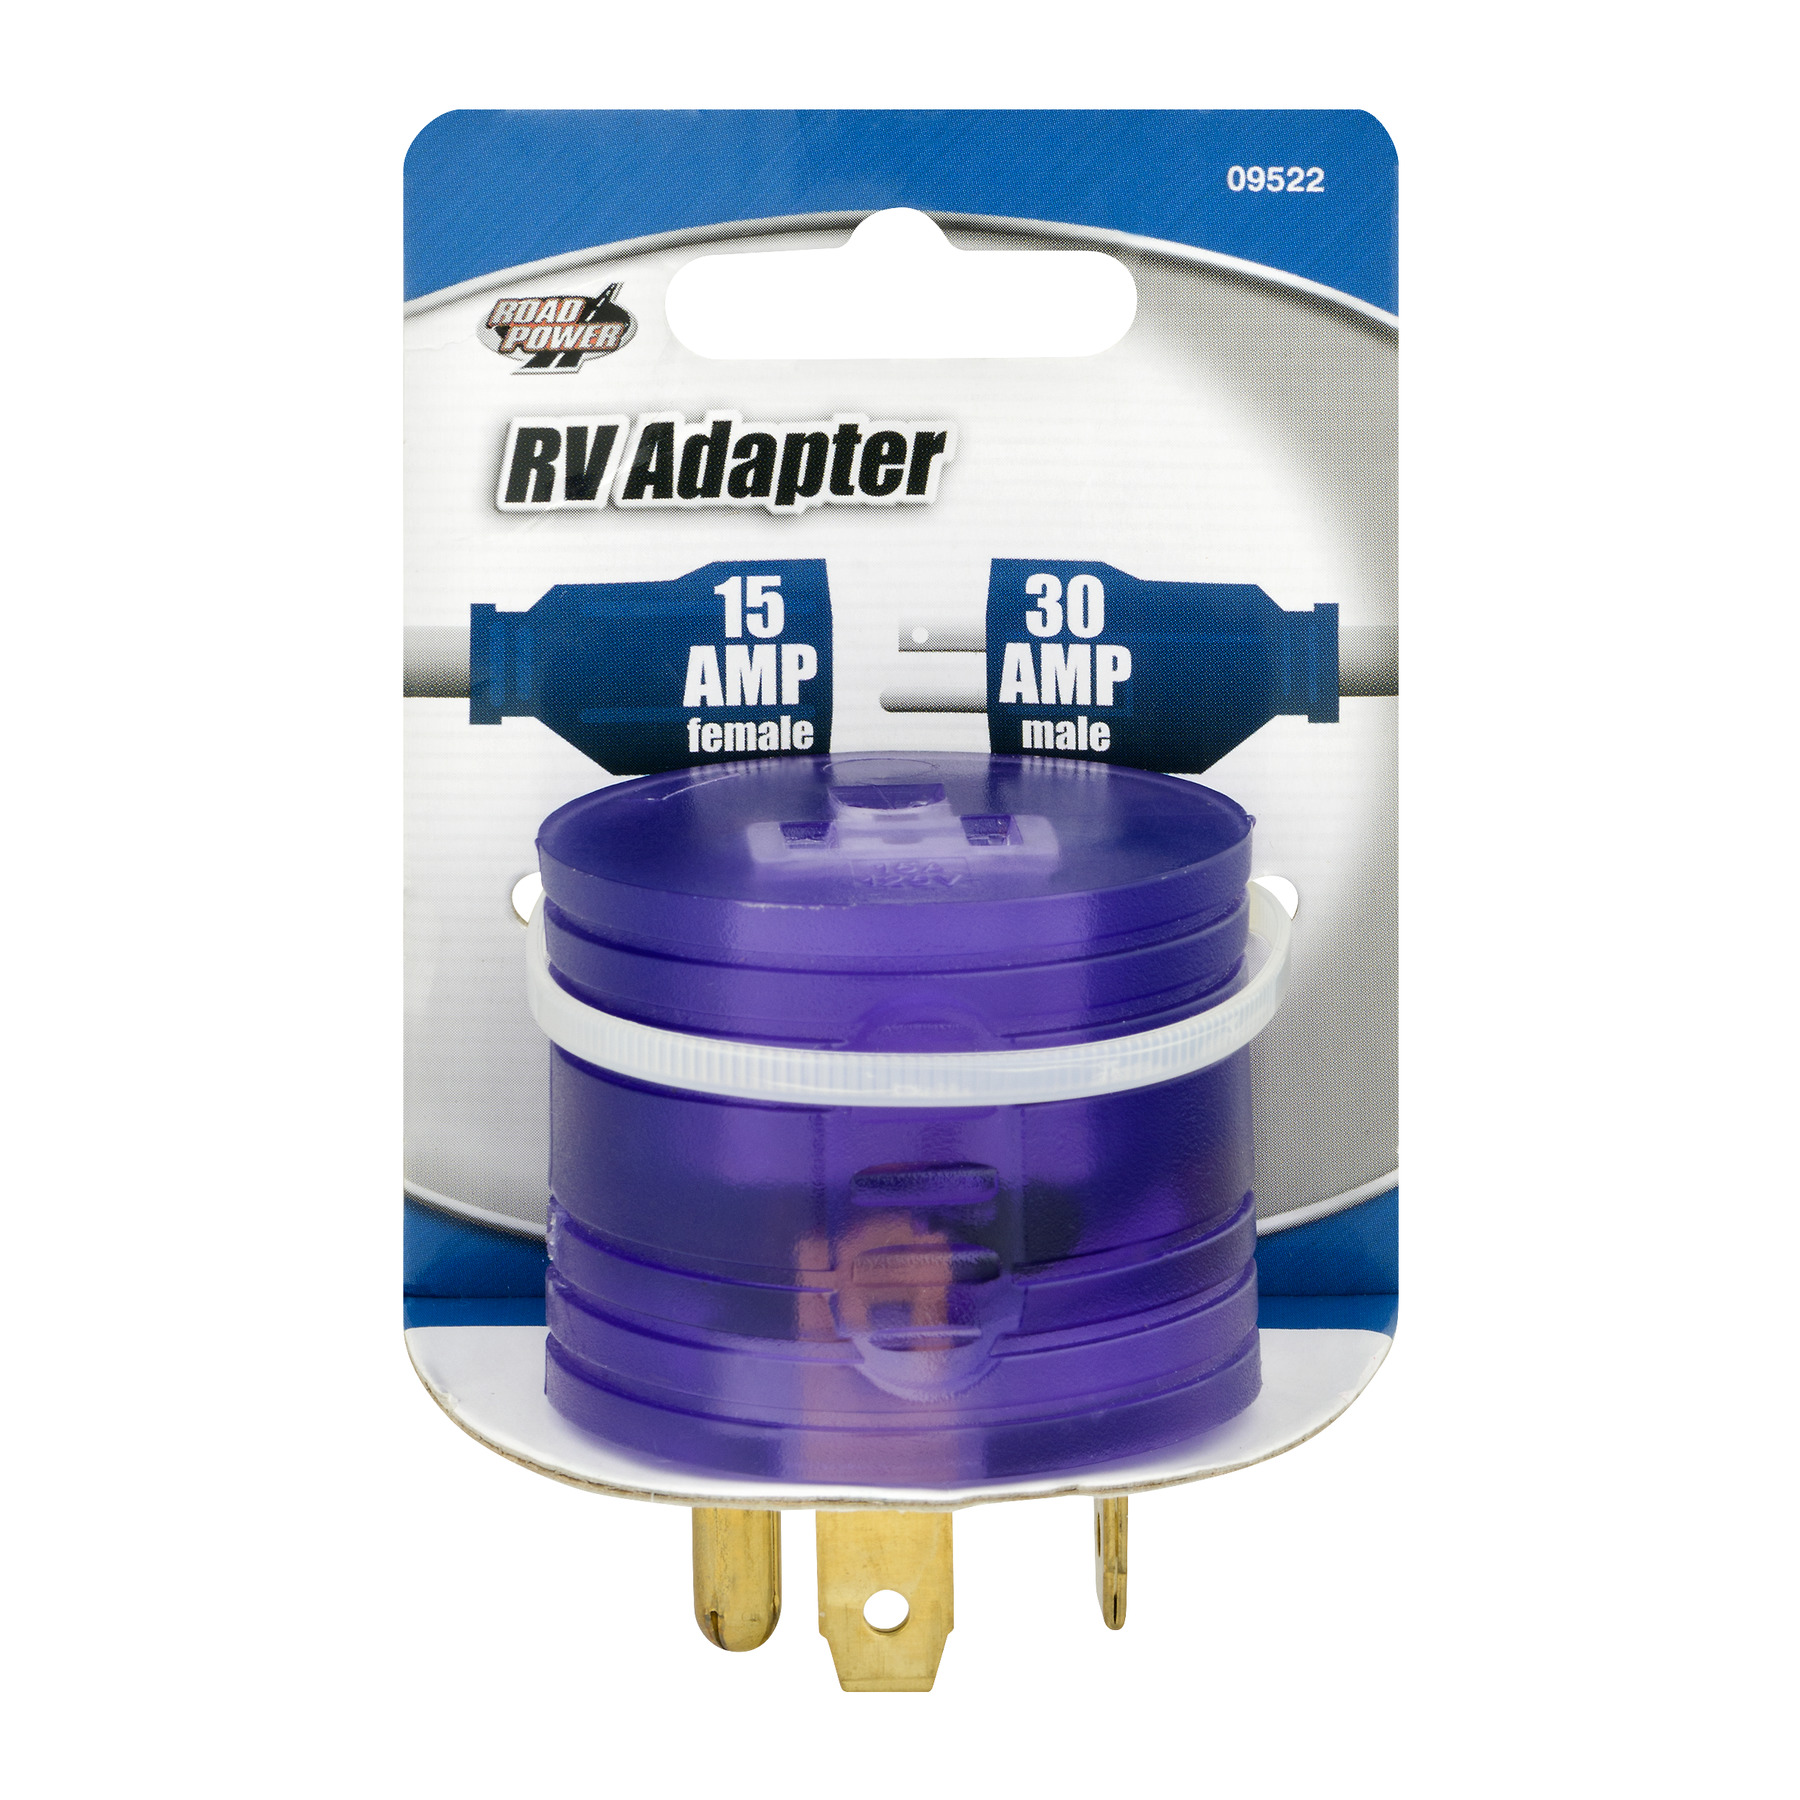 Road Power 30-15-Amp RV Power Adapter - image 1 of 5